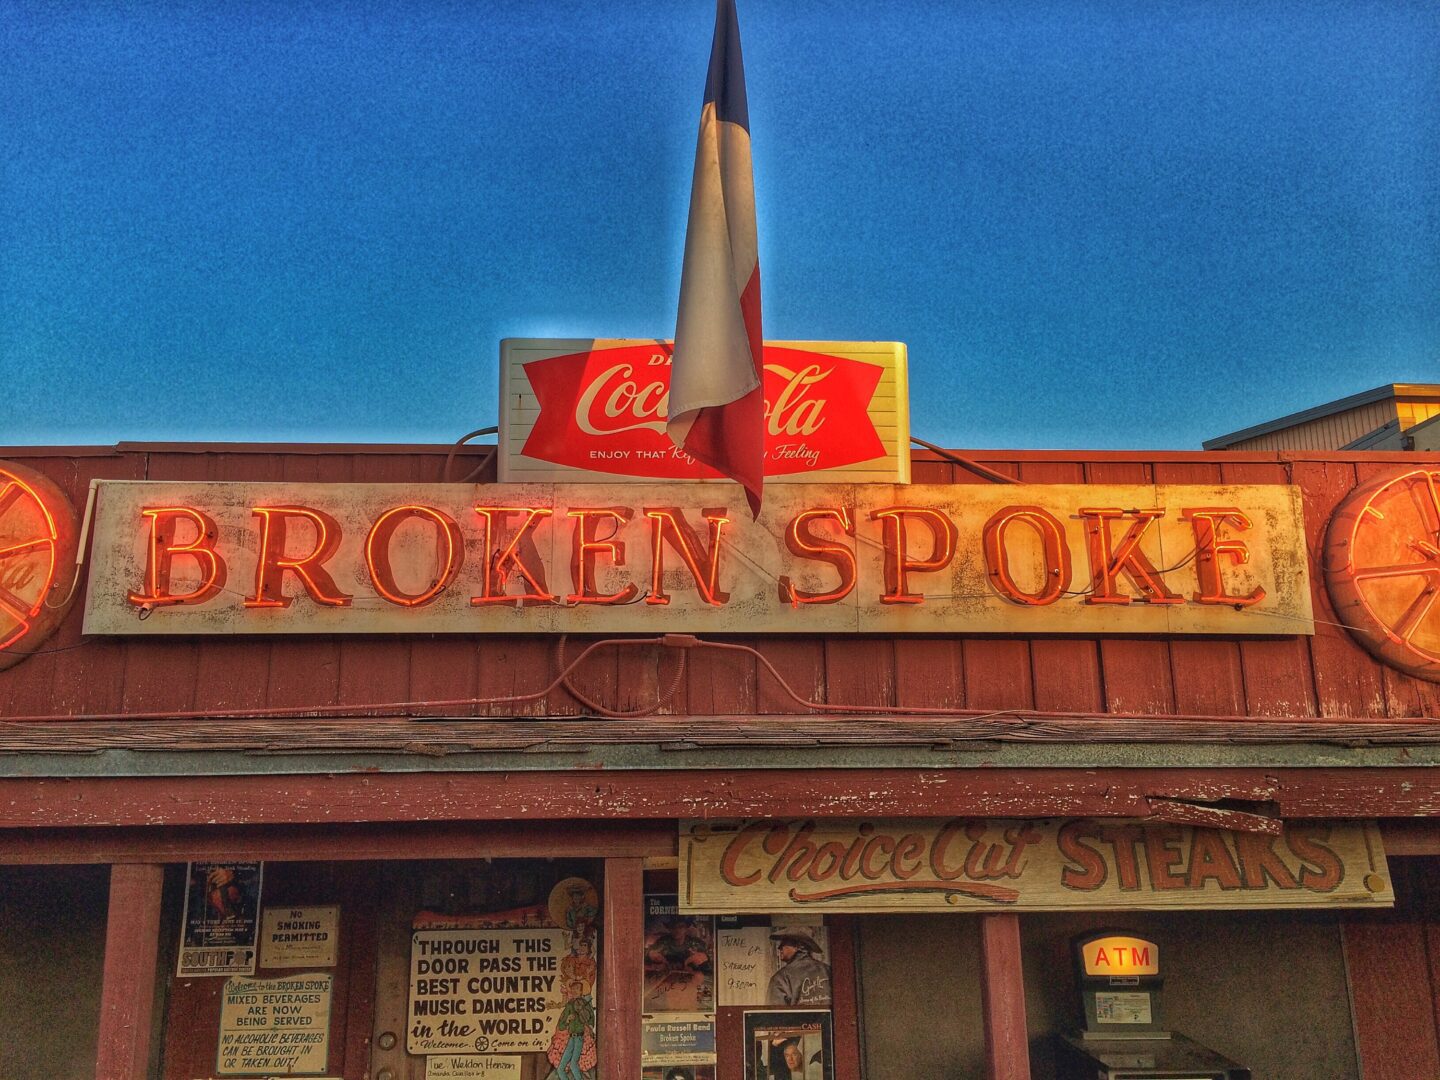 A red building with a broken spoon sign.